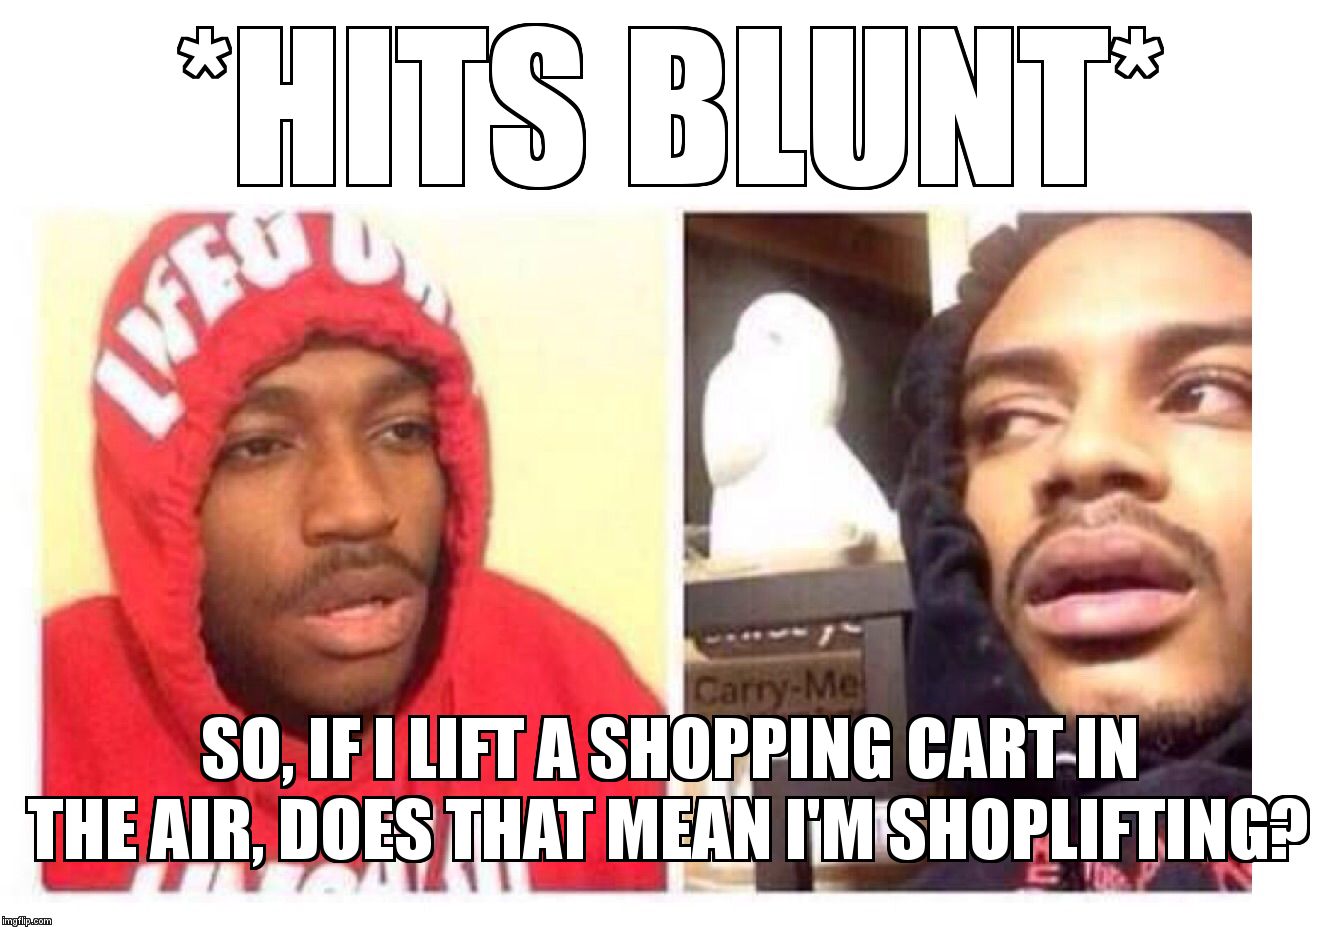 Hits blunt | *HITS BLUNT*; SO, IF I LIFT A SHOPPING CART IN THE AIR, DOES THAT MEAN I'M SHOPLIFTING? | image tagged in hits blunt | made w/ Imgflip meme maker